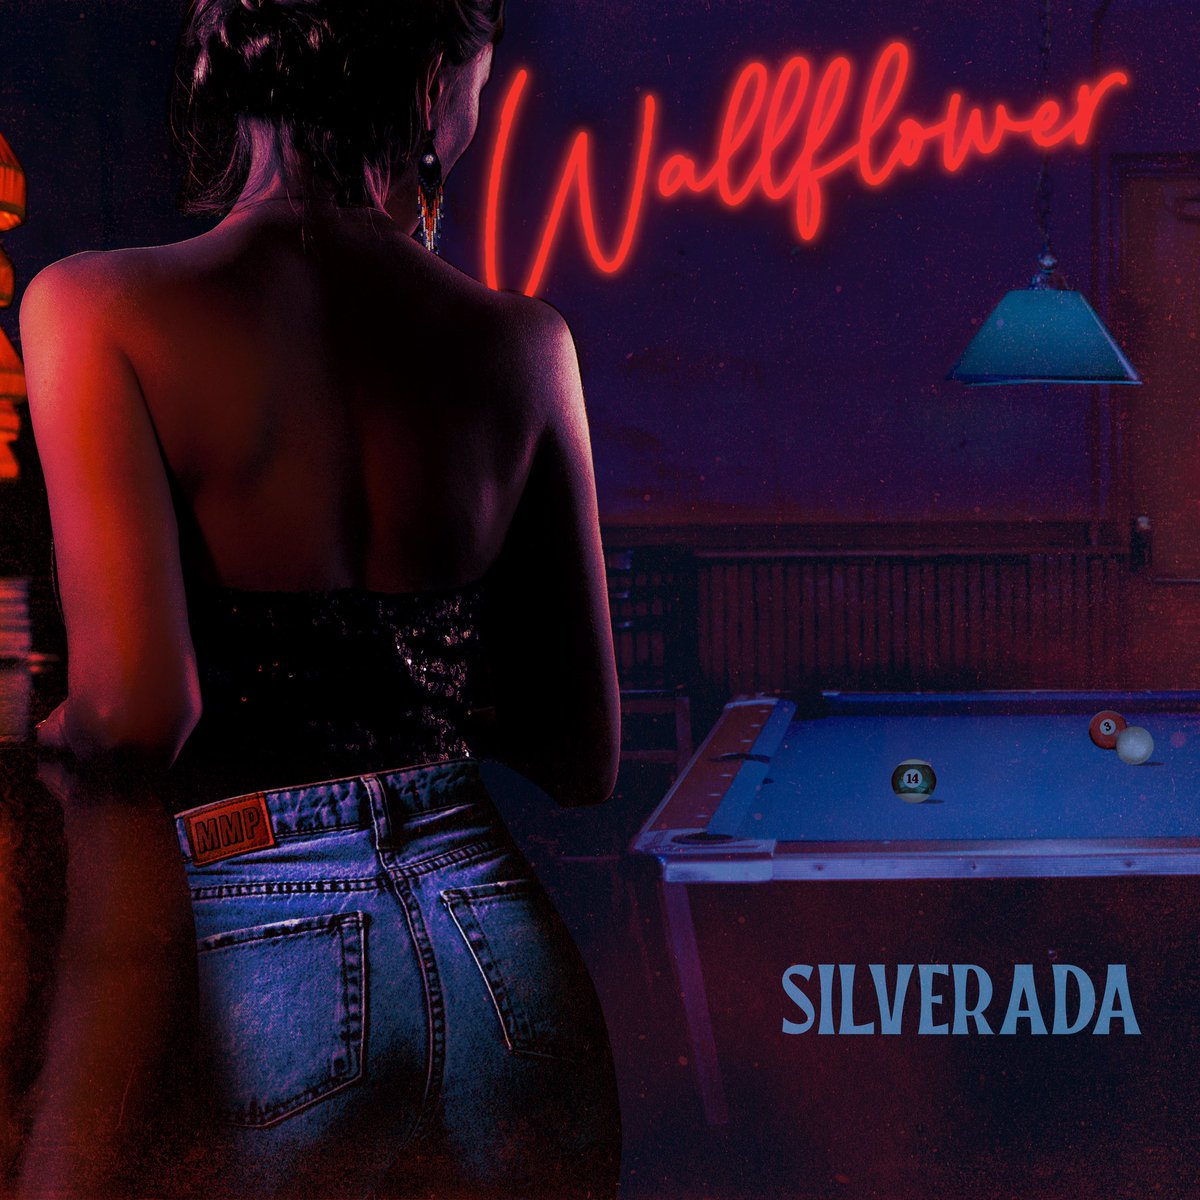 IT’S LIVE! ‘Wallflower’, the first single from our new self-titled album ‘Silverada’ is streaming now on your favorite digital platforms (stay tuned, Spotify will be up shortly)! #silverada #mikeandthemoonpies